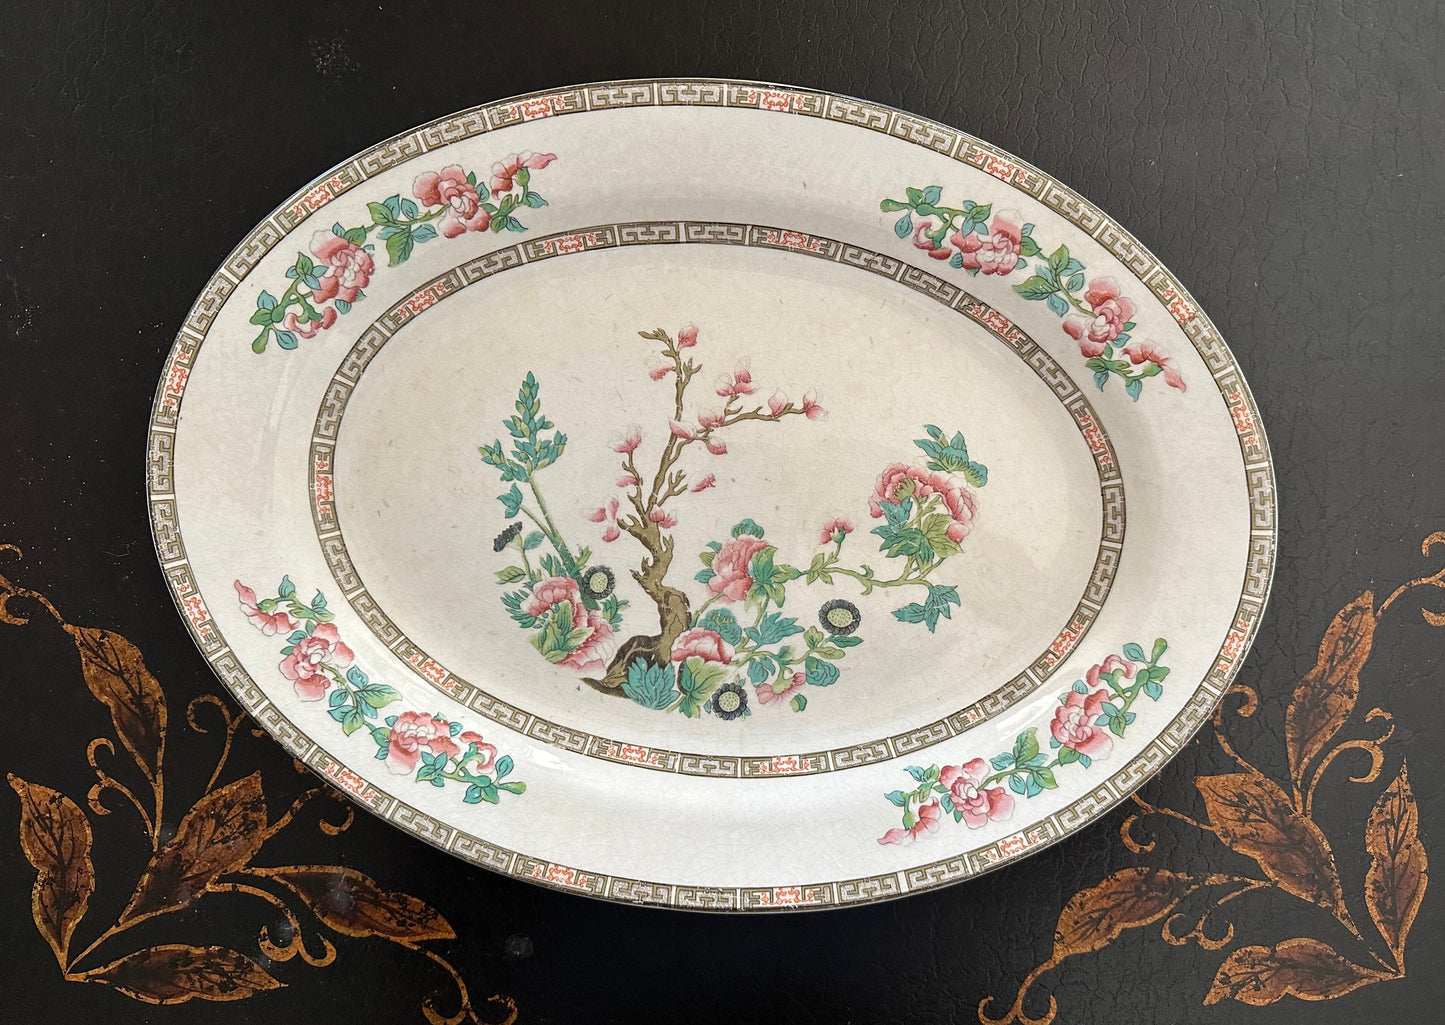 Serving Plate with Indian Tree design and Gold Trim by John Maddock and Sons #IndianTree #JohnMaddock #VintageServingPlate - DharBazaar